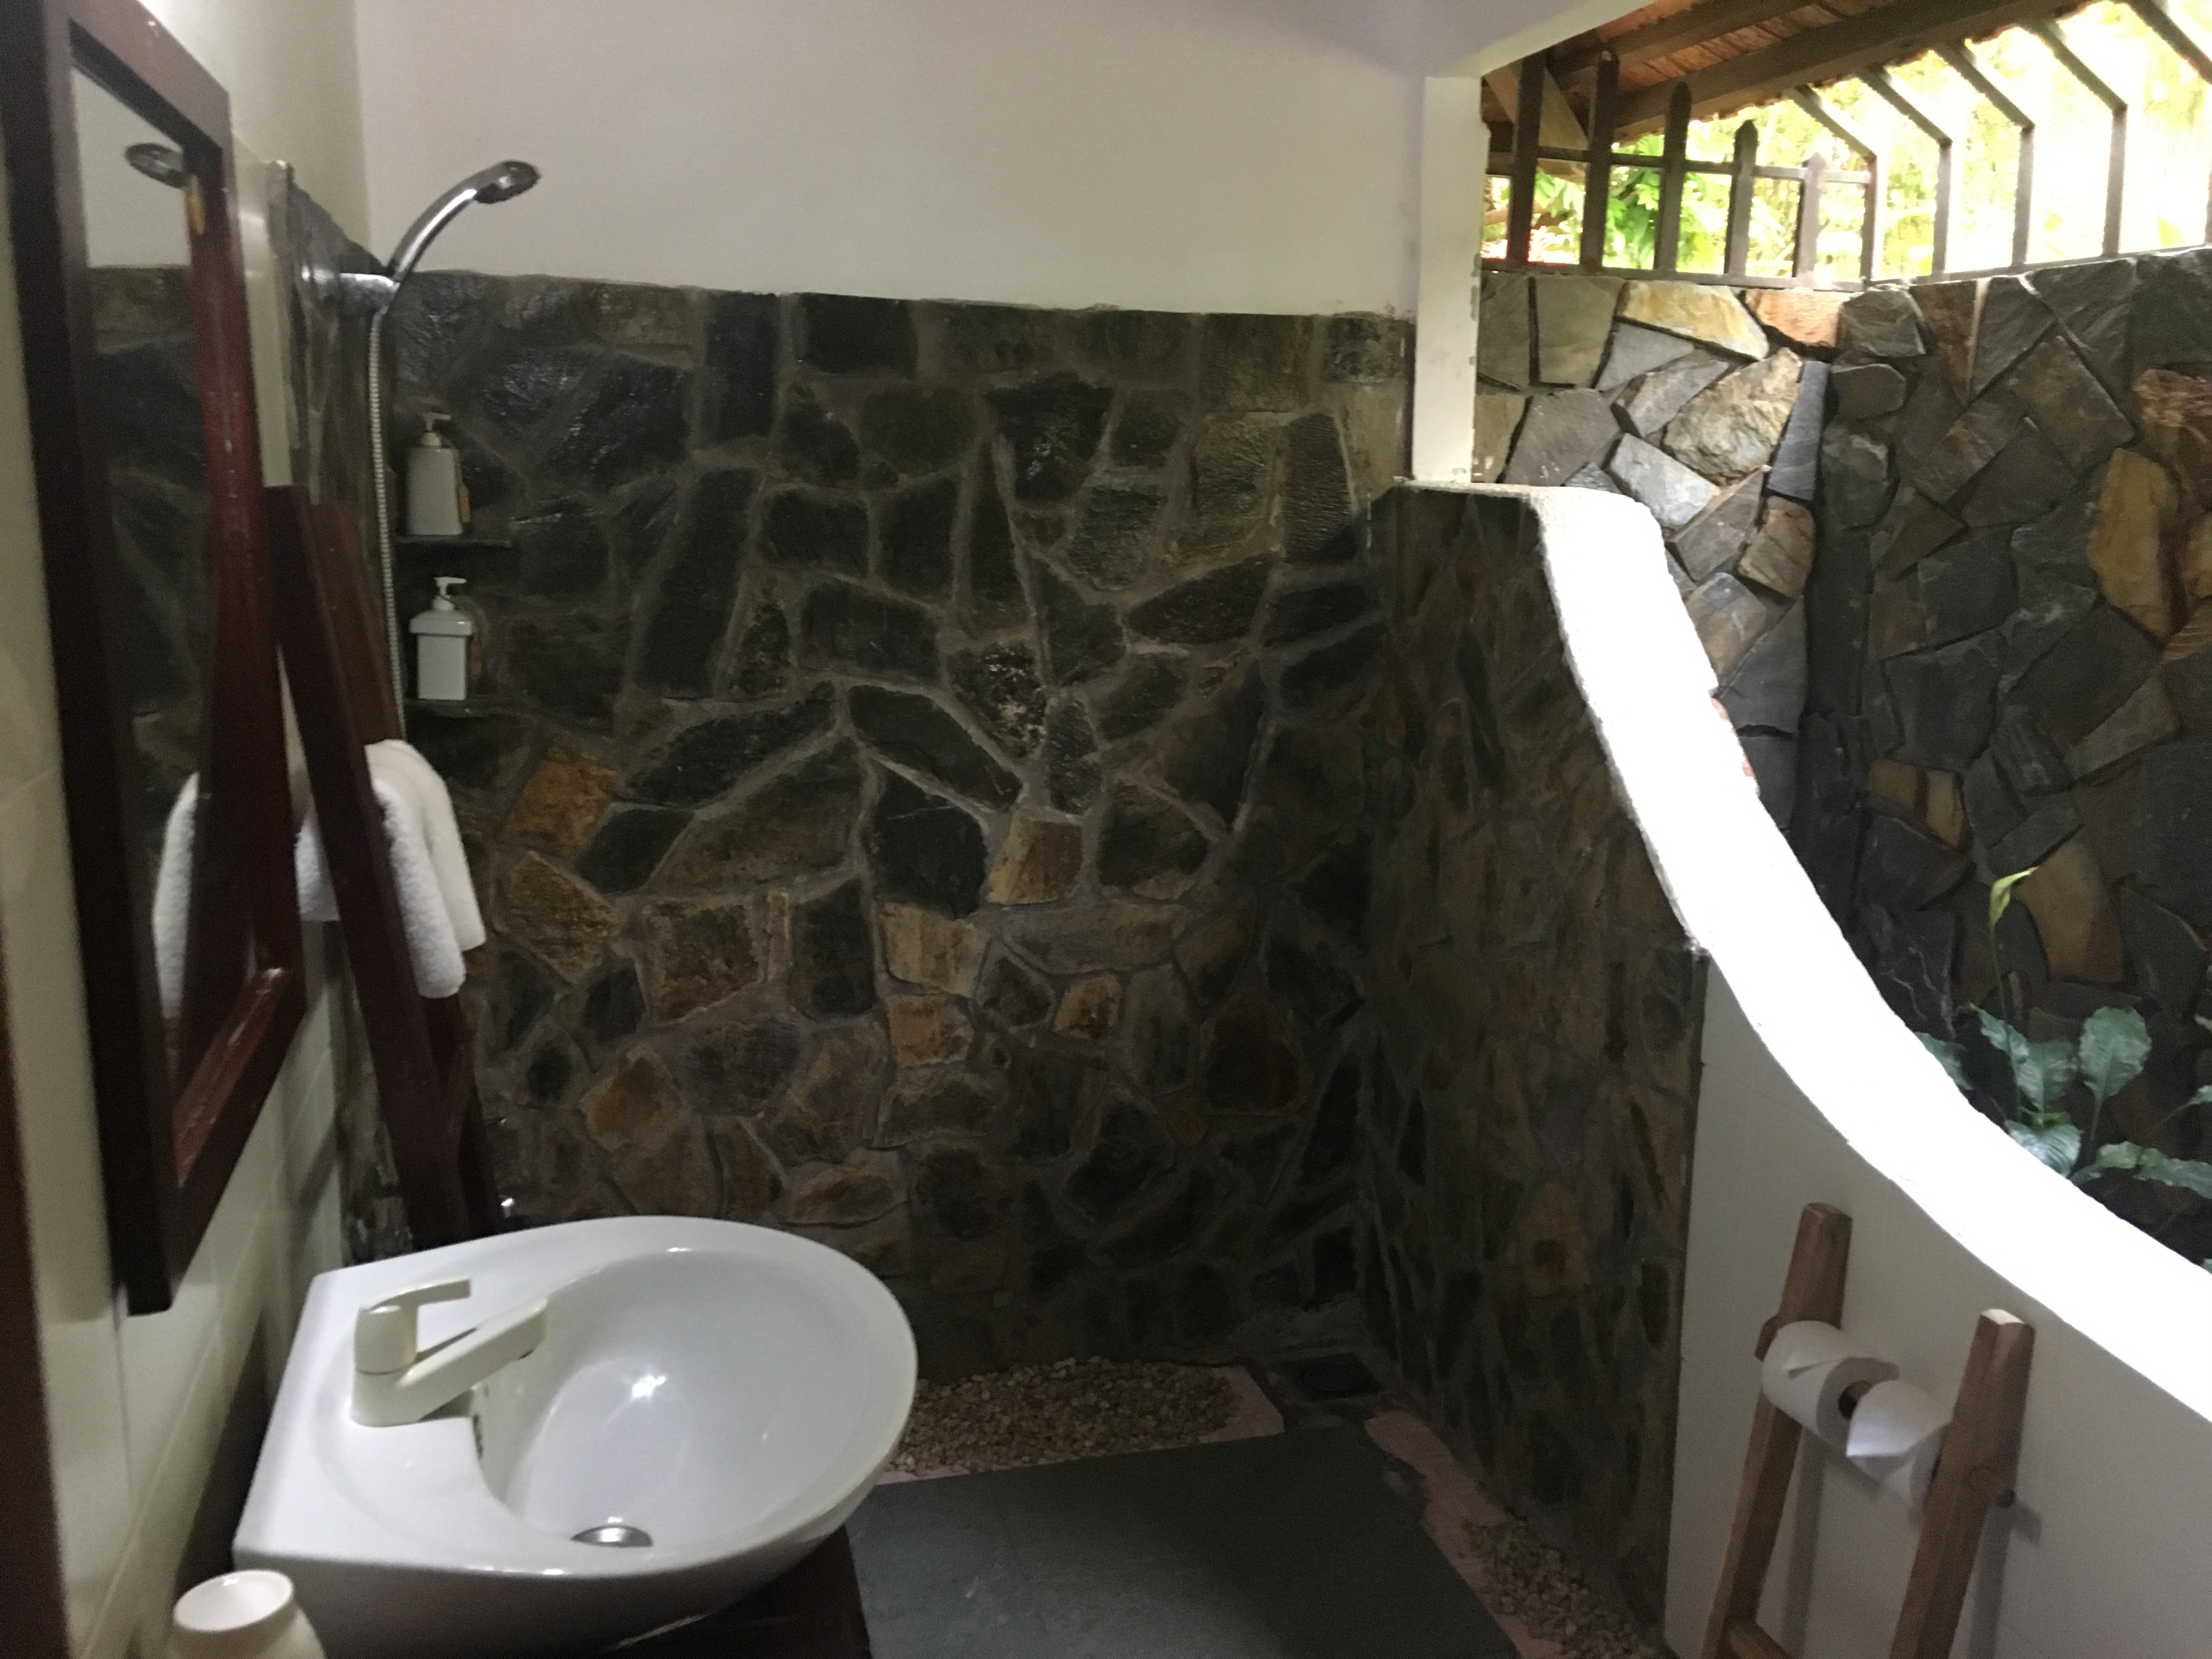 Partial outdoor bathroom at the bungalow at Thanh Kieu Beach Resort in Phu Quoc, Vietnam.